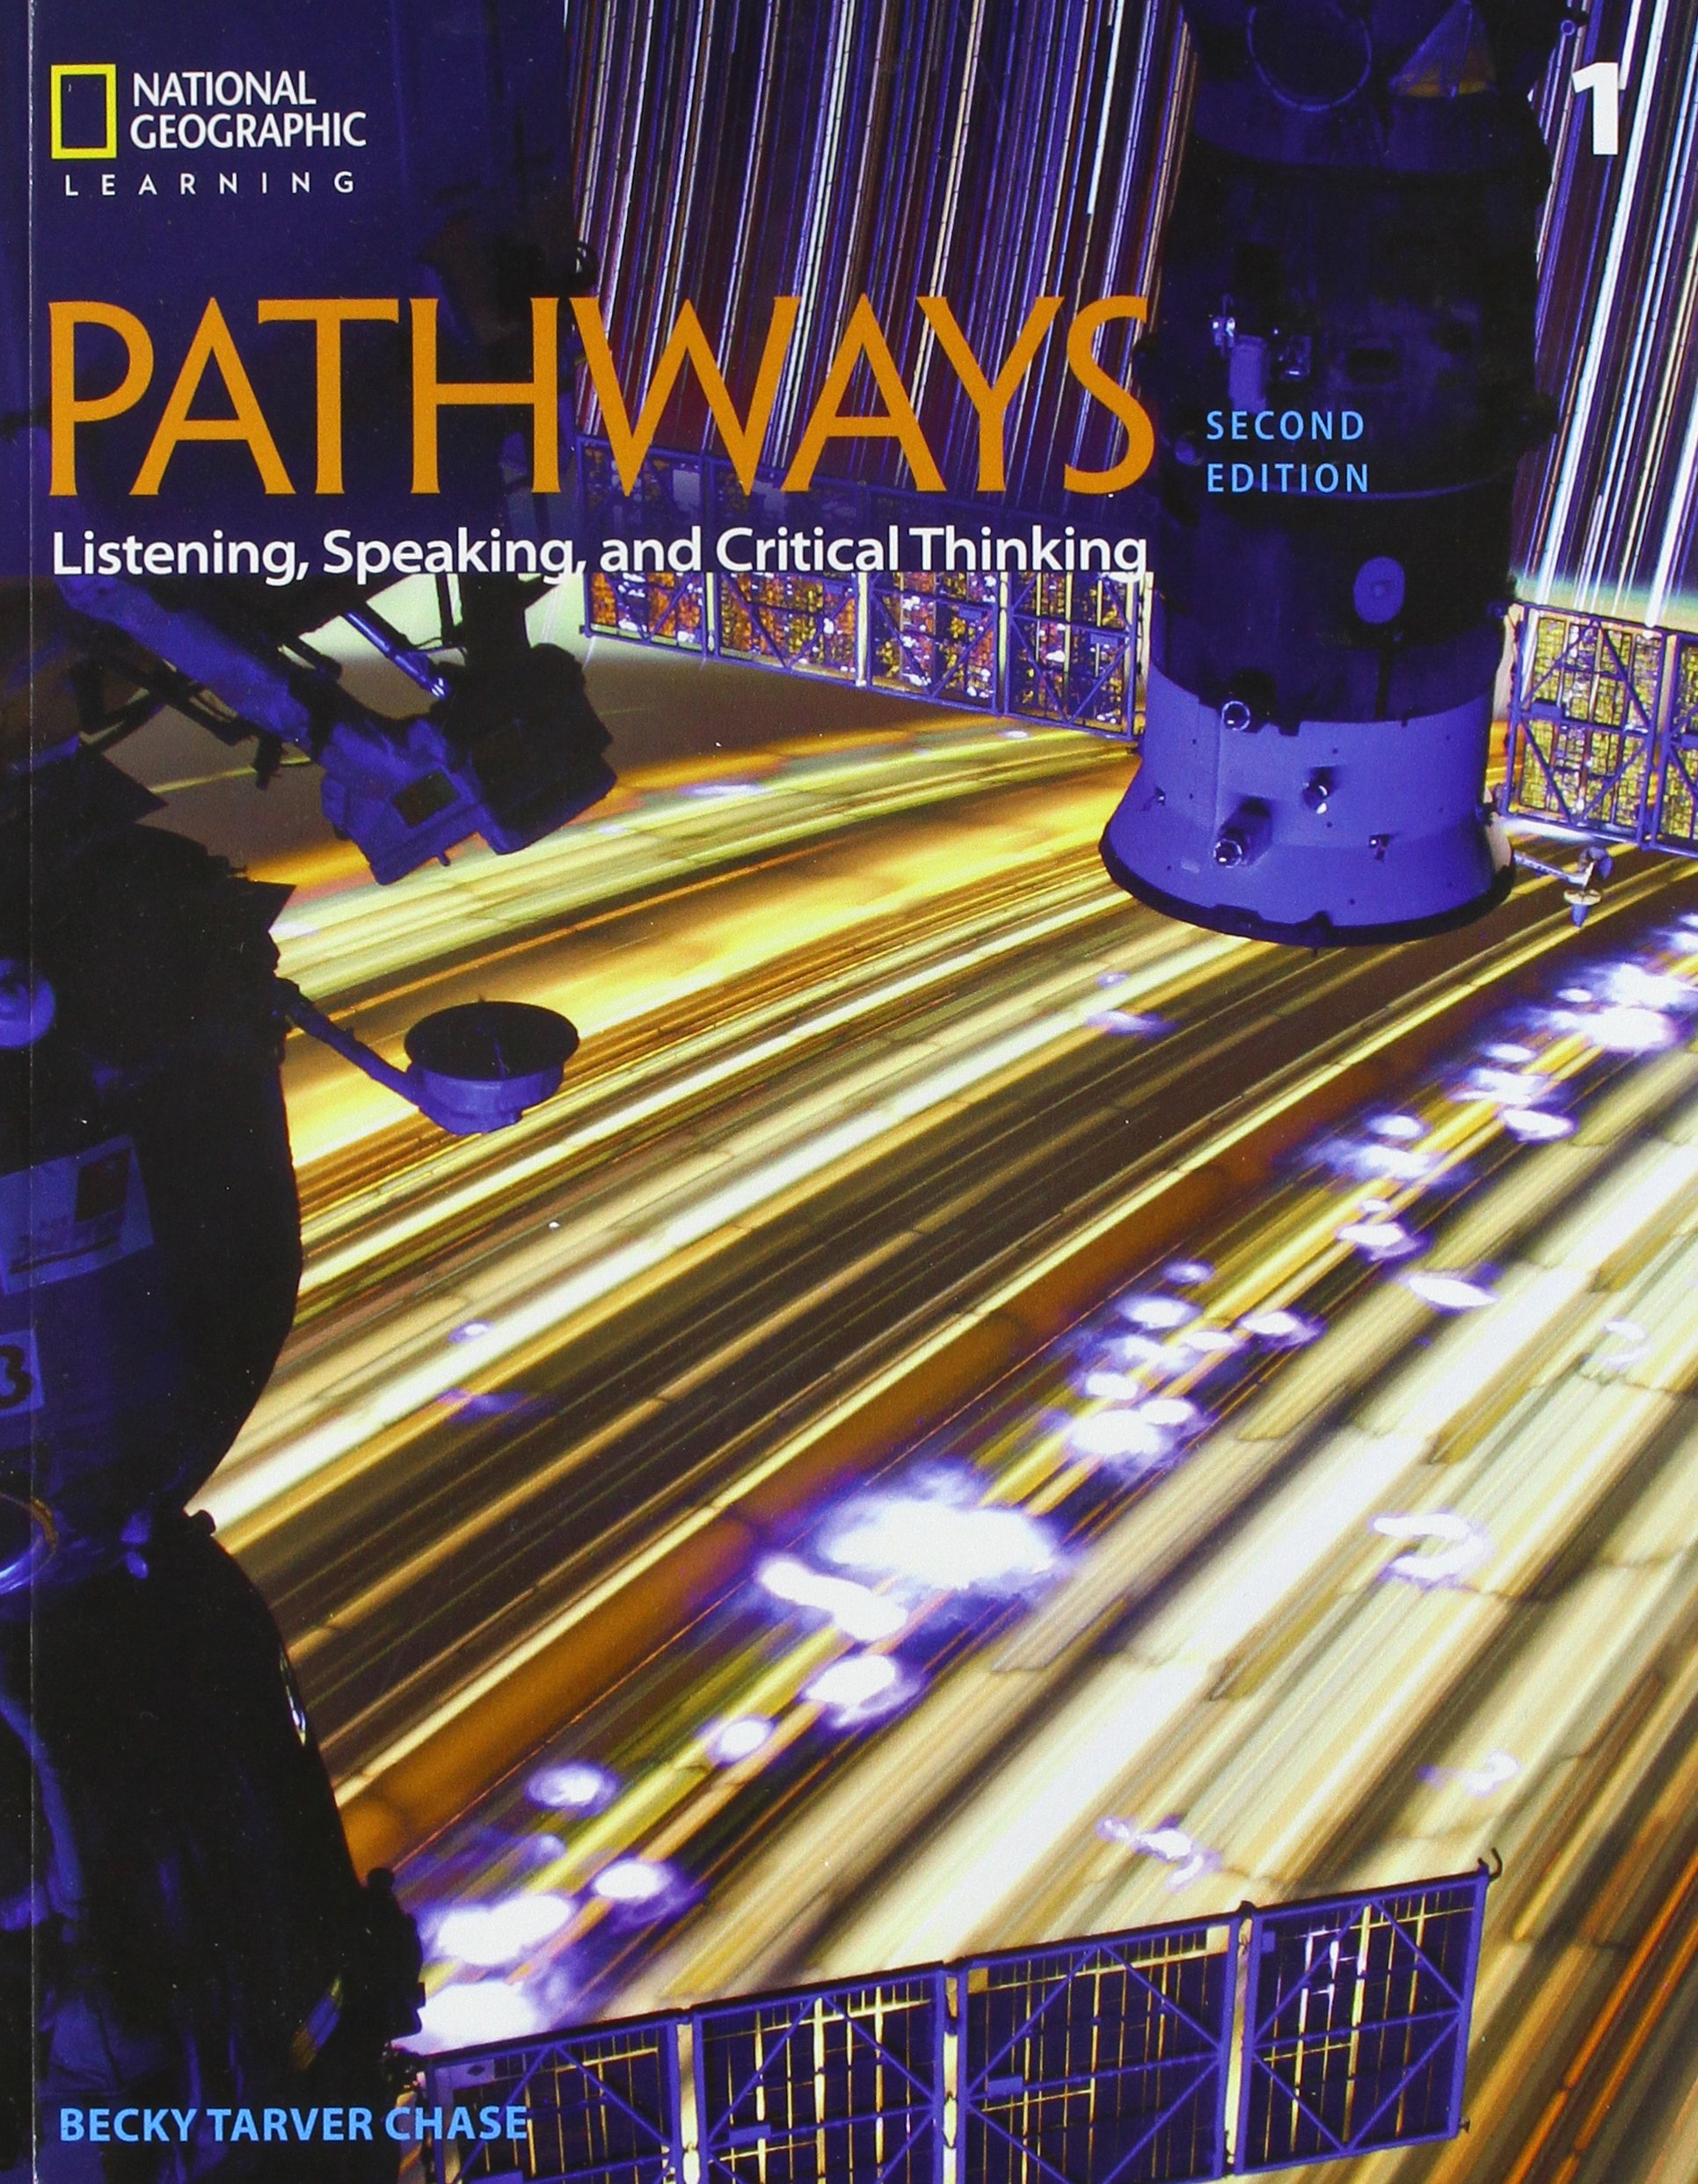 pathways listening speaking and critical thinking 1 pdf free